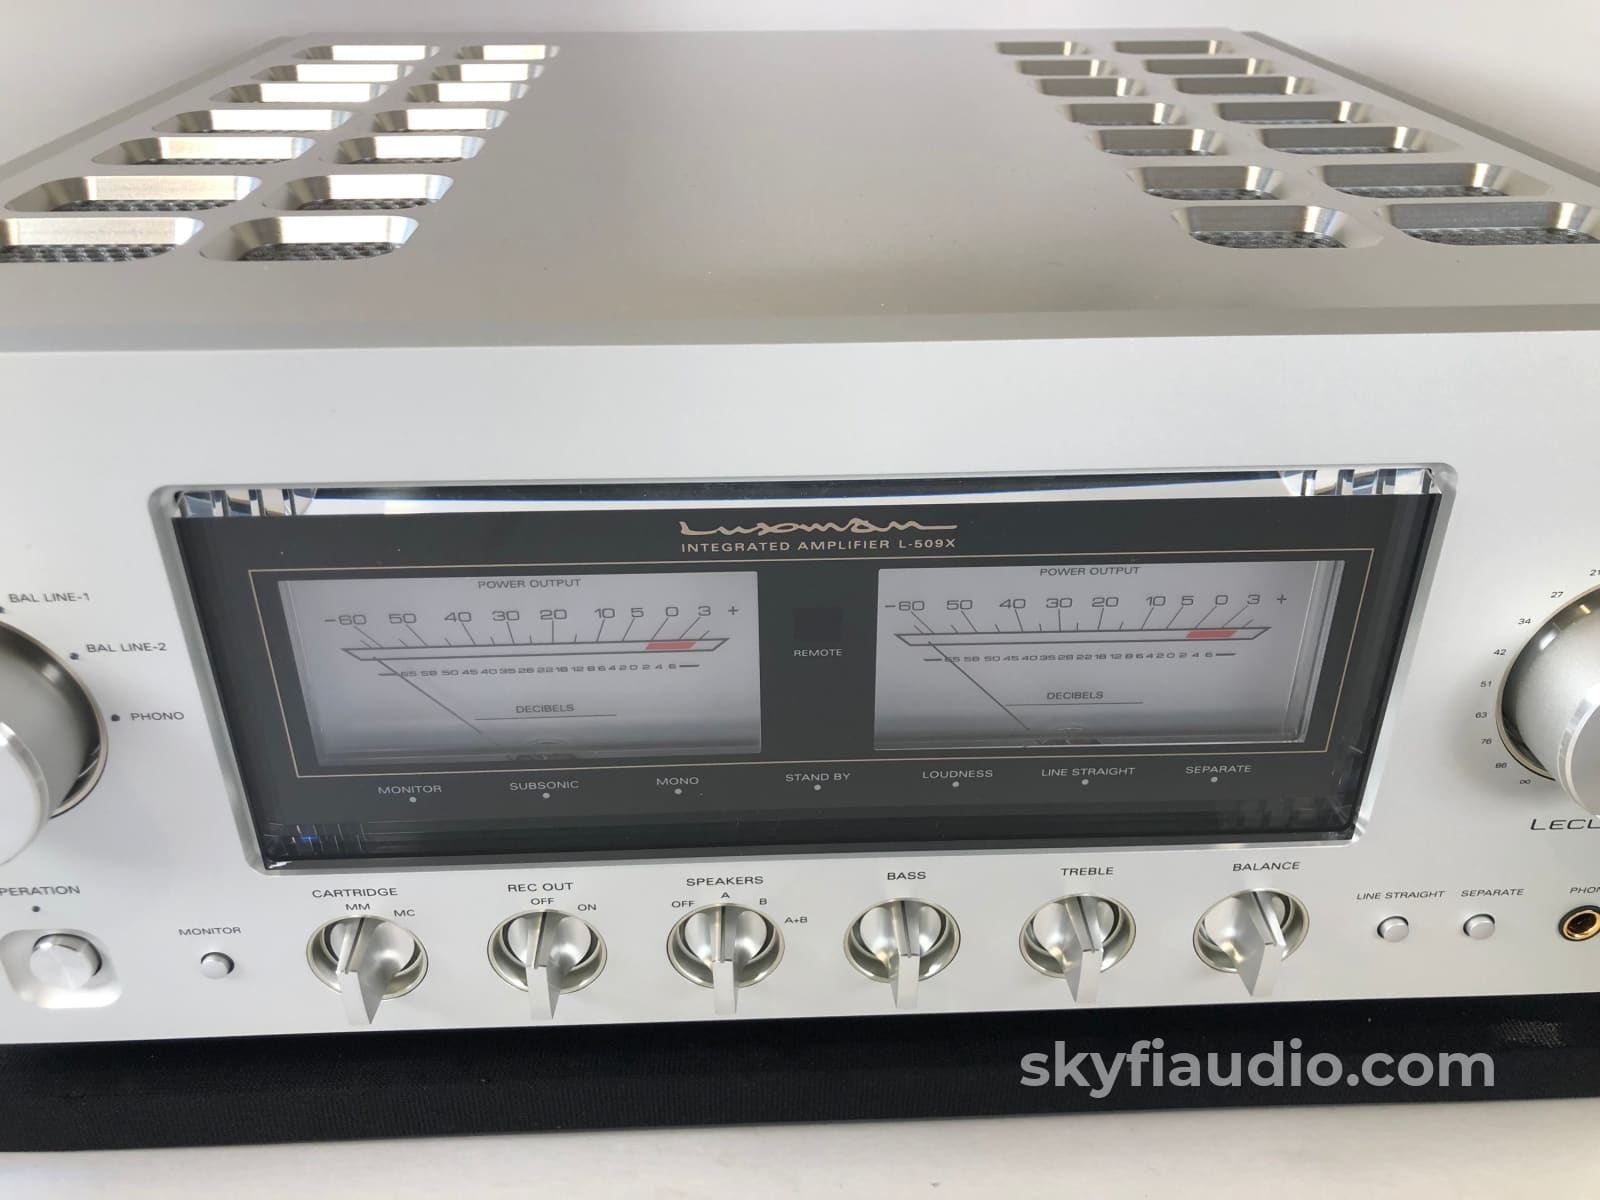 Luxman L-509X Integrated Amplifier With Phono - As New